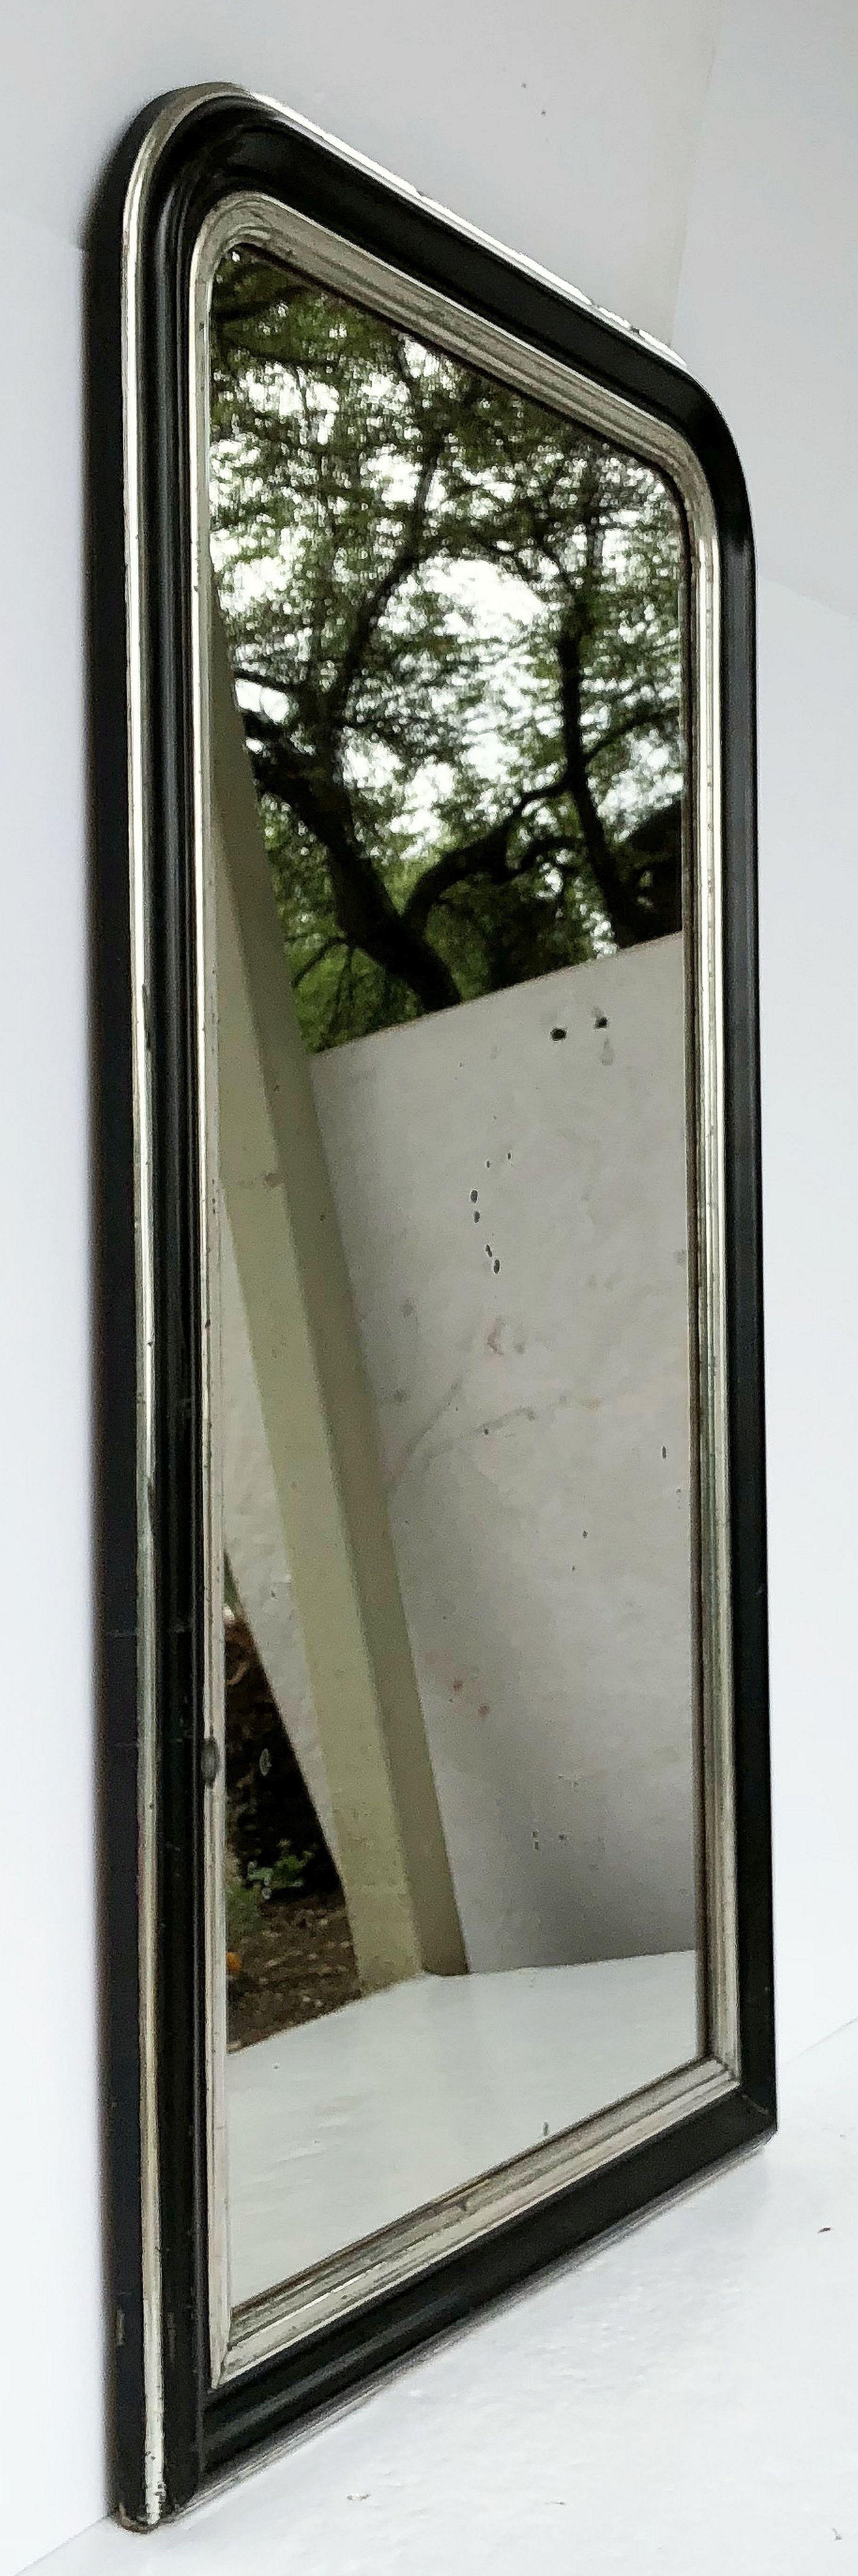 A handsome large Napoleon III period wall mirror featuring a lovely moulded surround and a design around the frame of black and silver leaf, with original mirrored glass.

Dimensions: H 53 1/2 x W 32 1/4